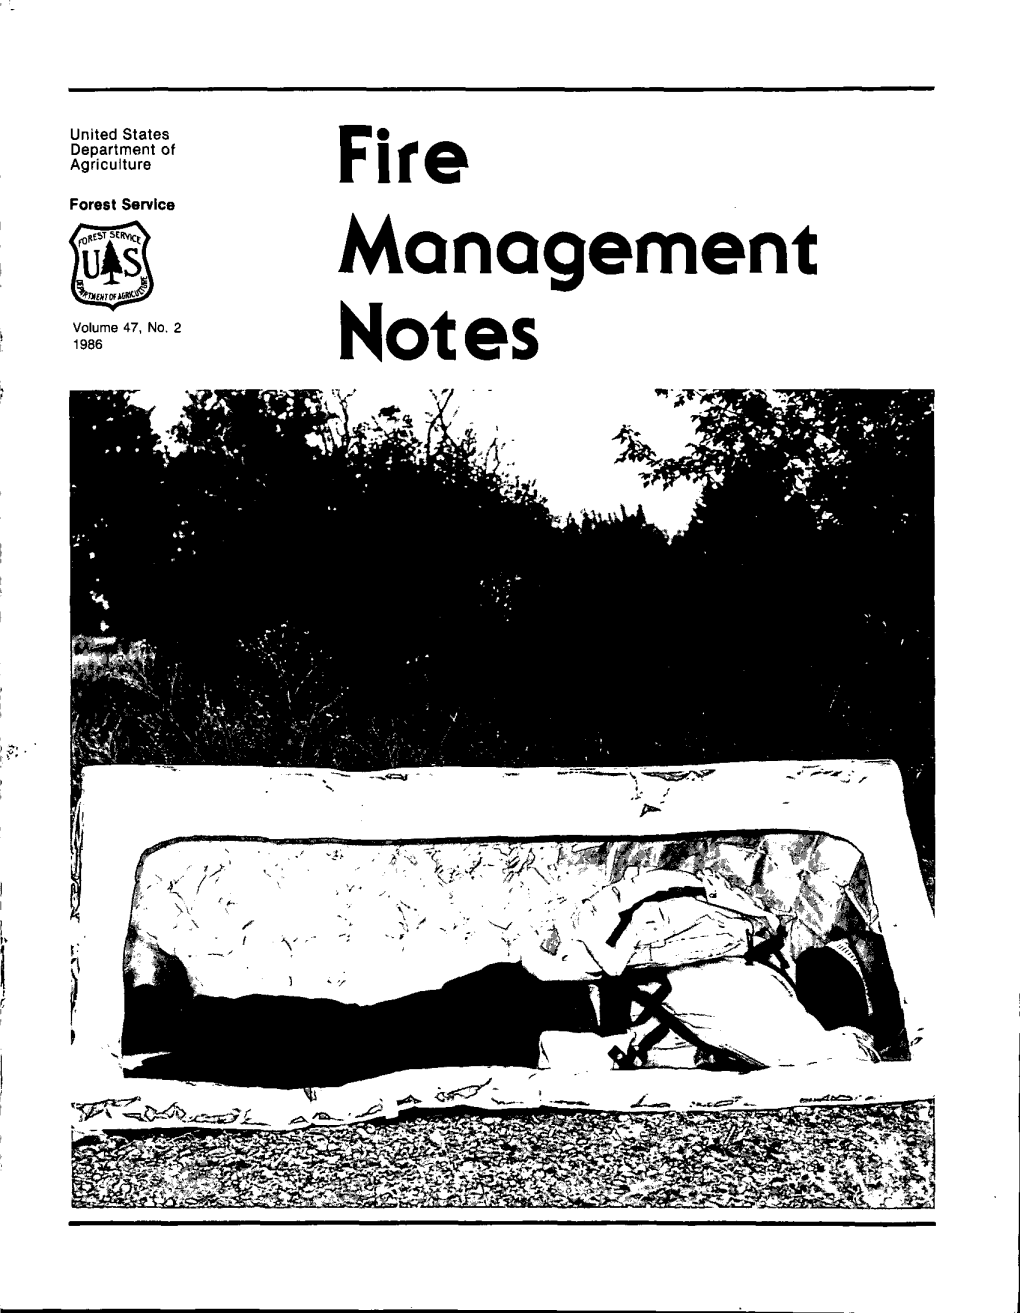 Link to the Full Fire Management Notes Issue